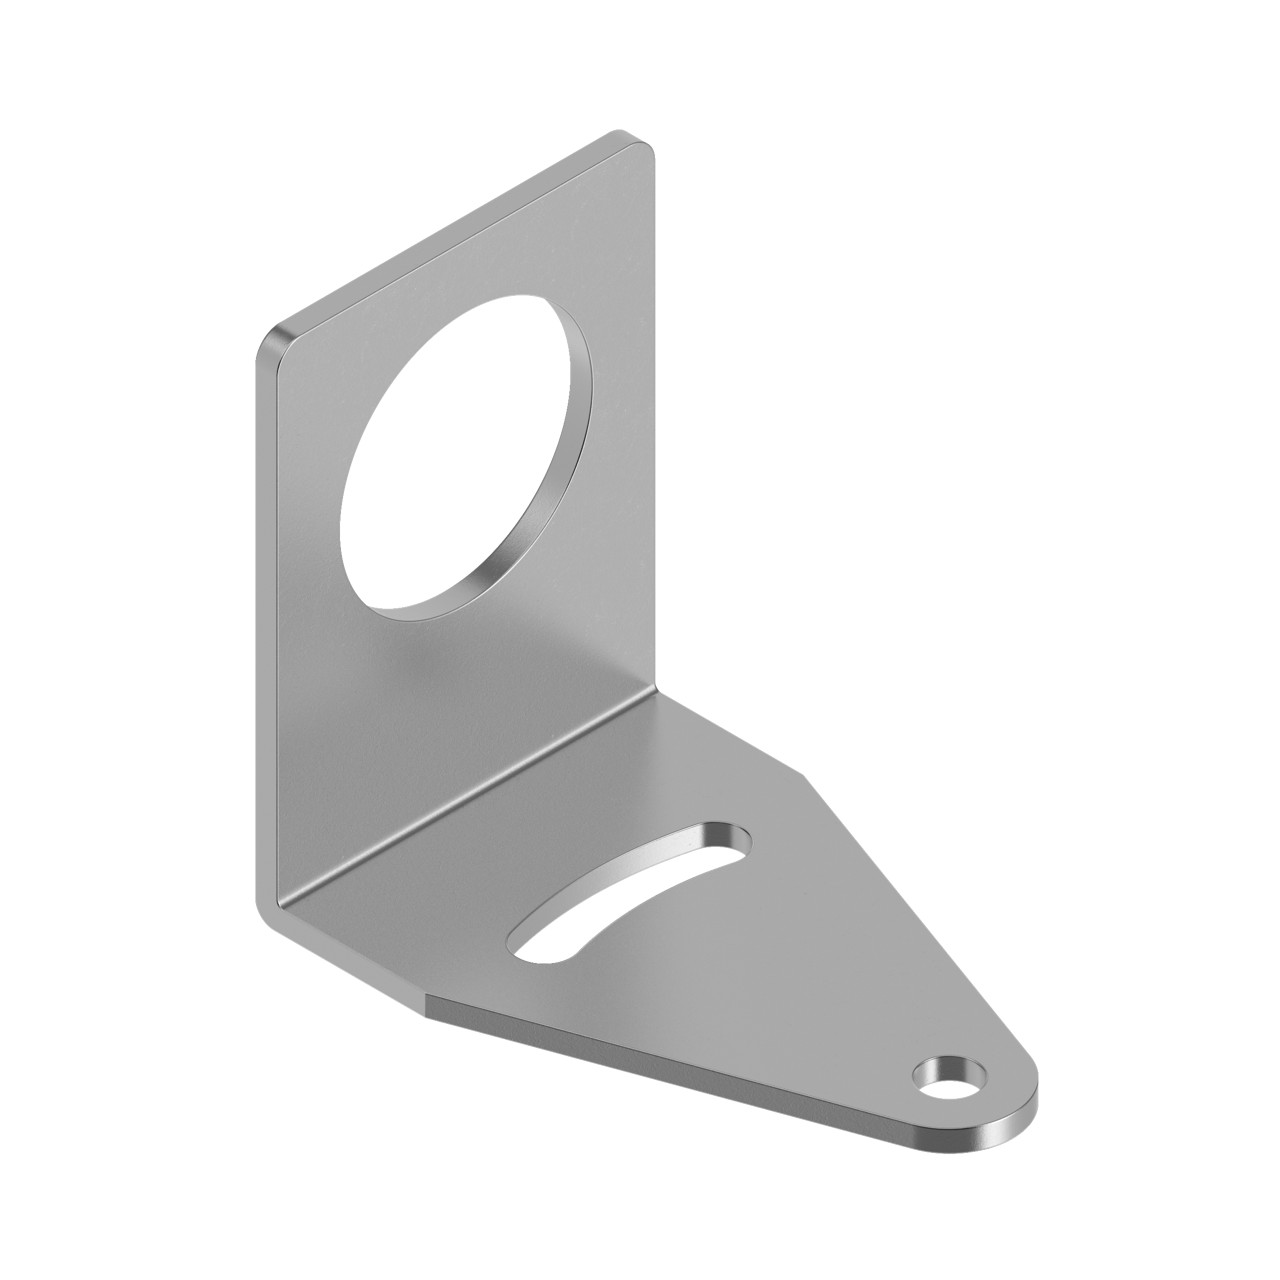 Image SMB30A - Bracket: Right-Angle Mounting; Material: 12 Gauge Stainless Steel; Curved mounting slot for versatility/orientation; Clearance for M6 (1/4 in